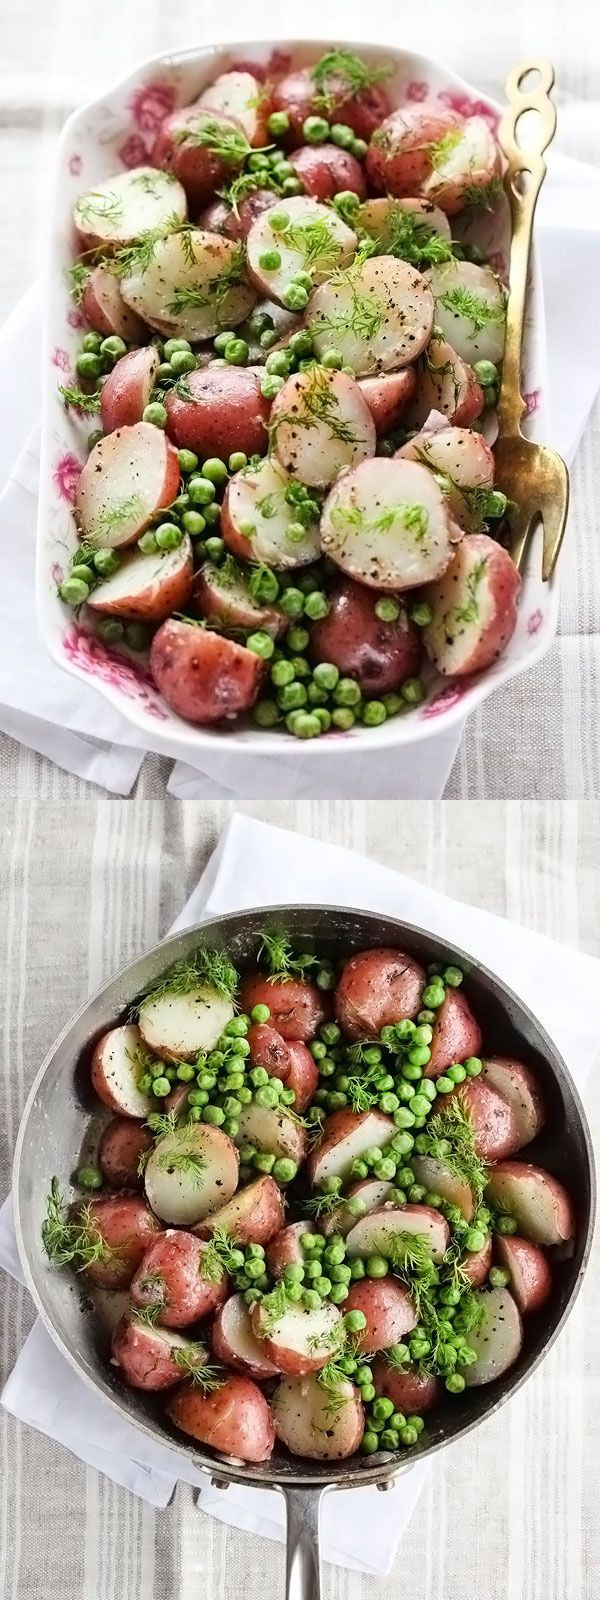 Brunch Vegetable Side Dishes
 Dilled Red Potatoes and Peas are a super simple brunch or